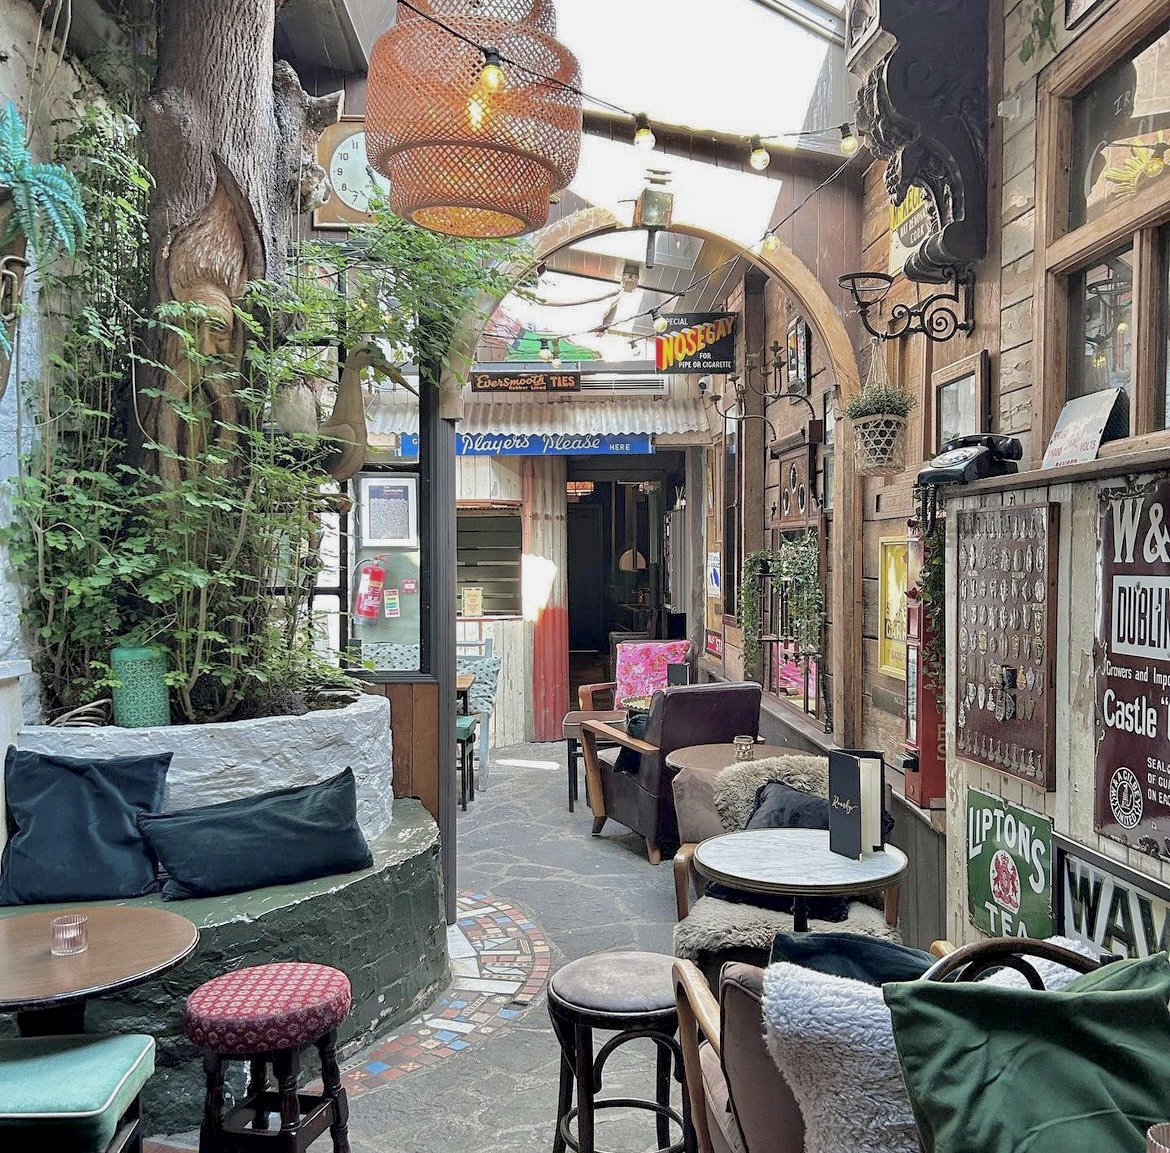 It's Roundy's o'clock! 🍸
Discover Tralee's charming, quirky cocktail spot—a neighbourhood bar with heaps of character!

#visittralee #tralee #discoverkerry #kerry #traleetoday  #traleebay #traleetownpark #discoverireland #wildatlanticway #TraleeBar #RoundysBar #CocktailBar #Bars